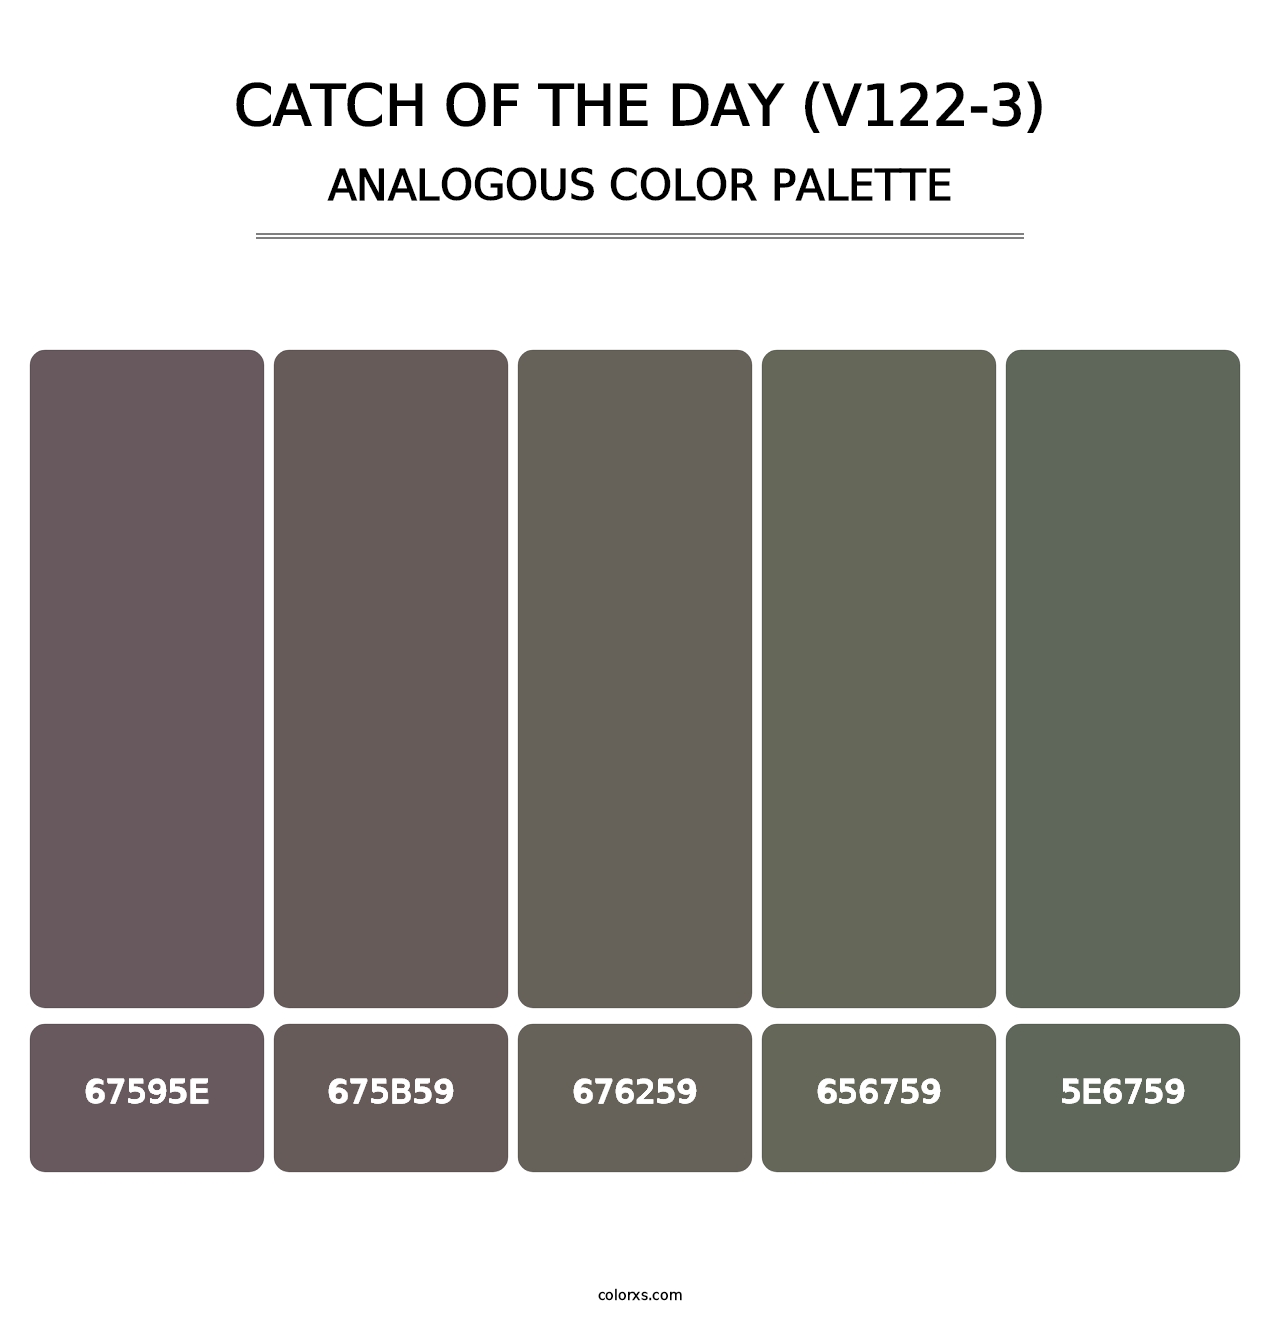 Catch of the Day (V122-3) - Analogous Color Palette